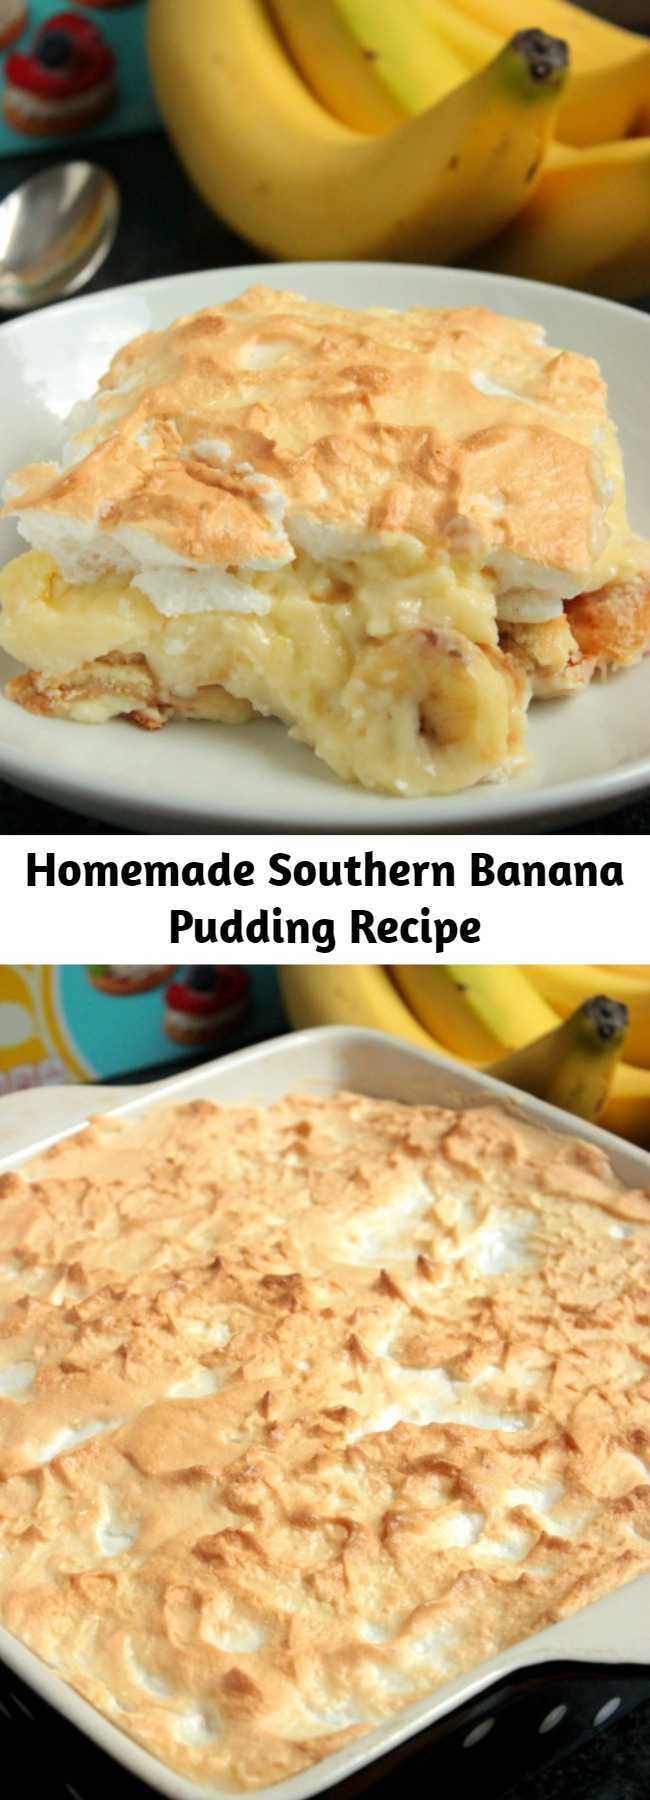 Homemade Southern Banana Pudding Recipe - Serve is hot or cold, this Homemade Southern Banana Pudding is going to be loved by all! Roasting the banana gives it a richer banana flavor too!